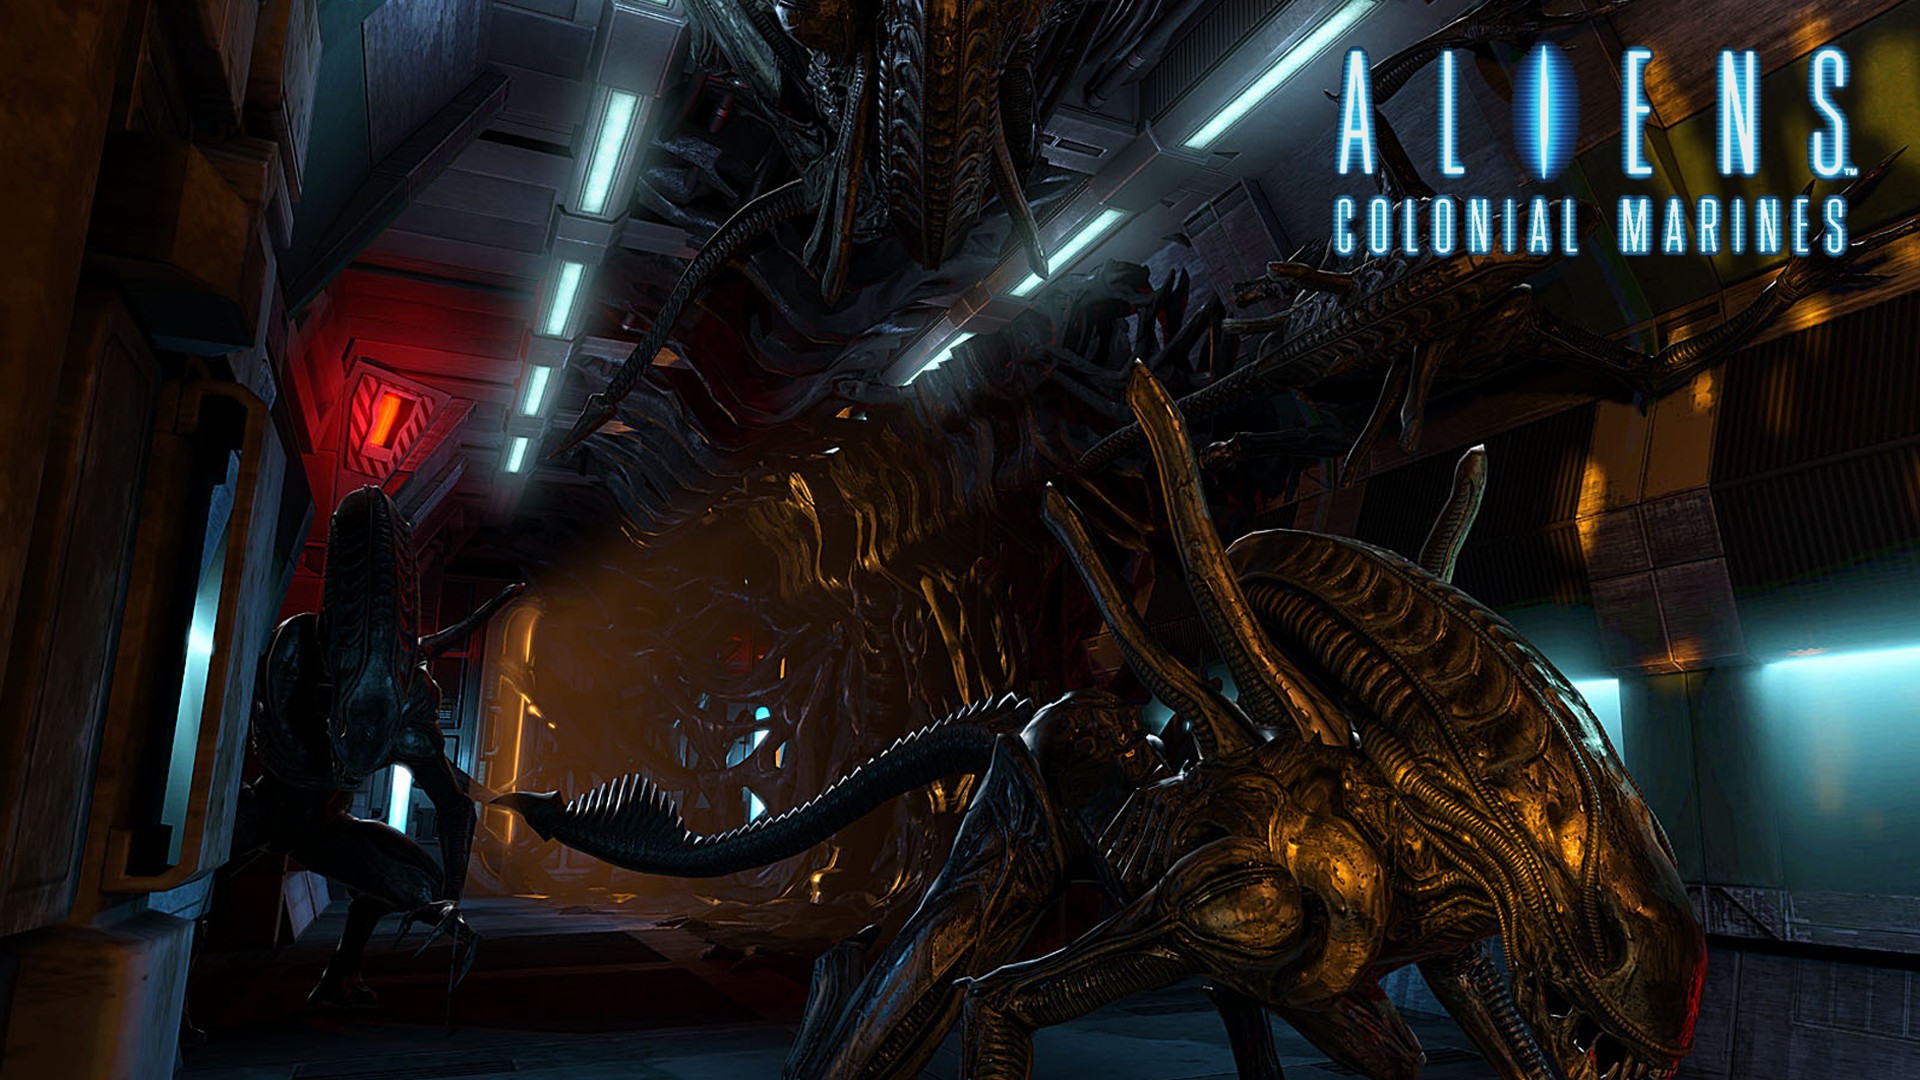 1920x1080 ... Wallpapers of Aliens Colonial Marines HDQ Cover ...